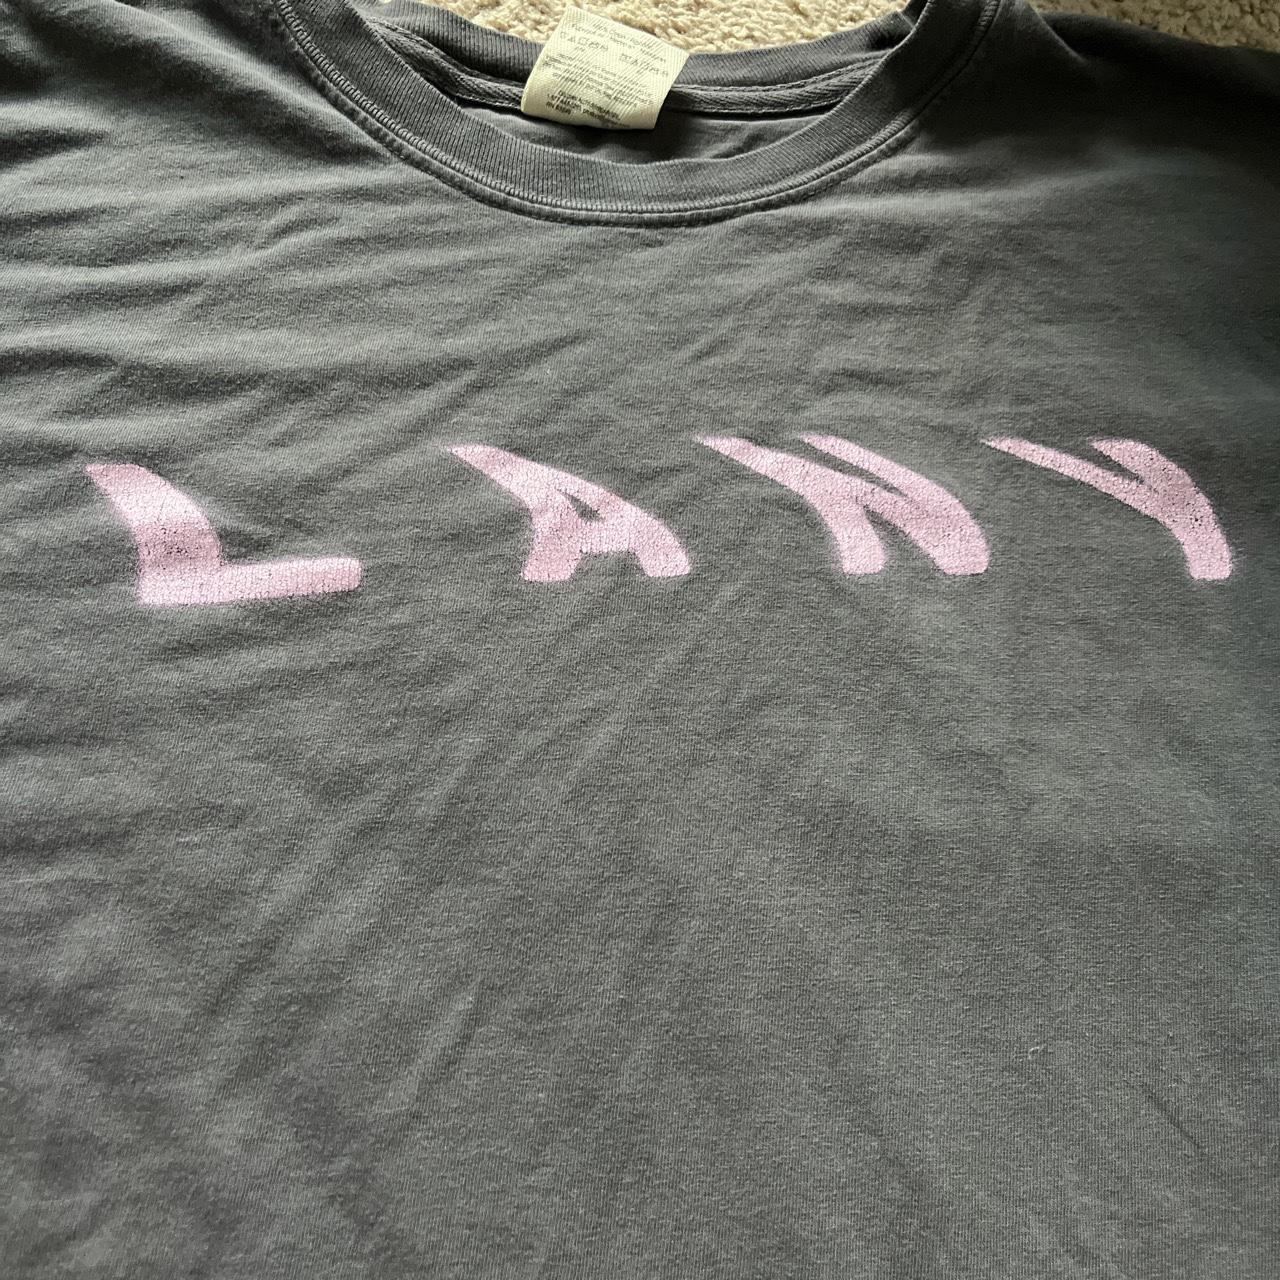 authentic lany merch gray shirt with pink lettering - Depop